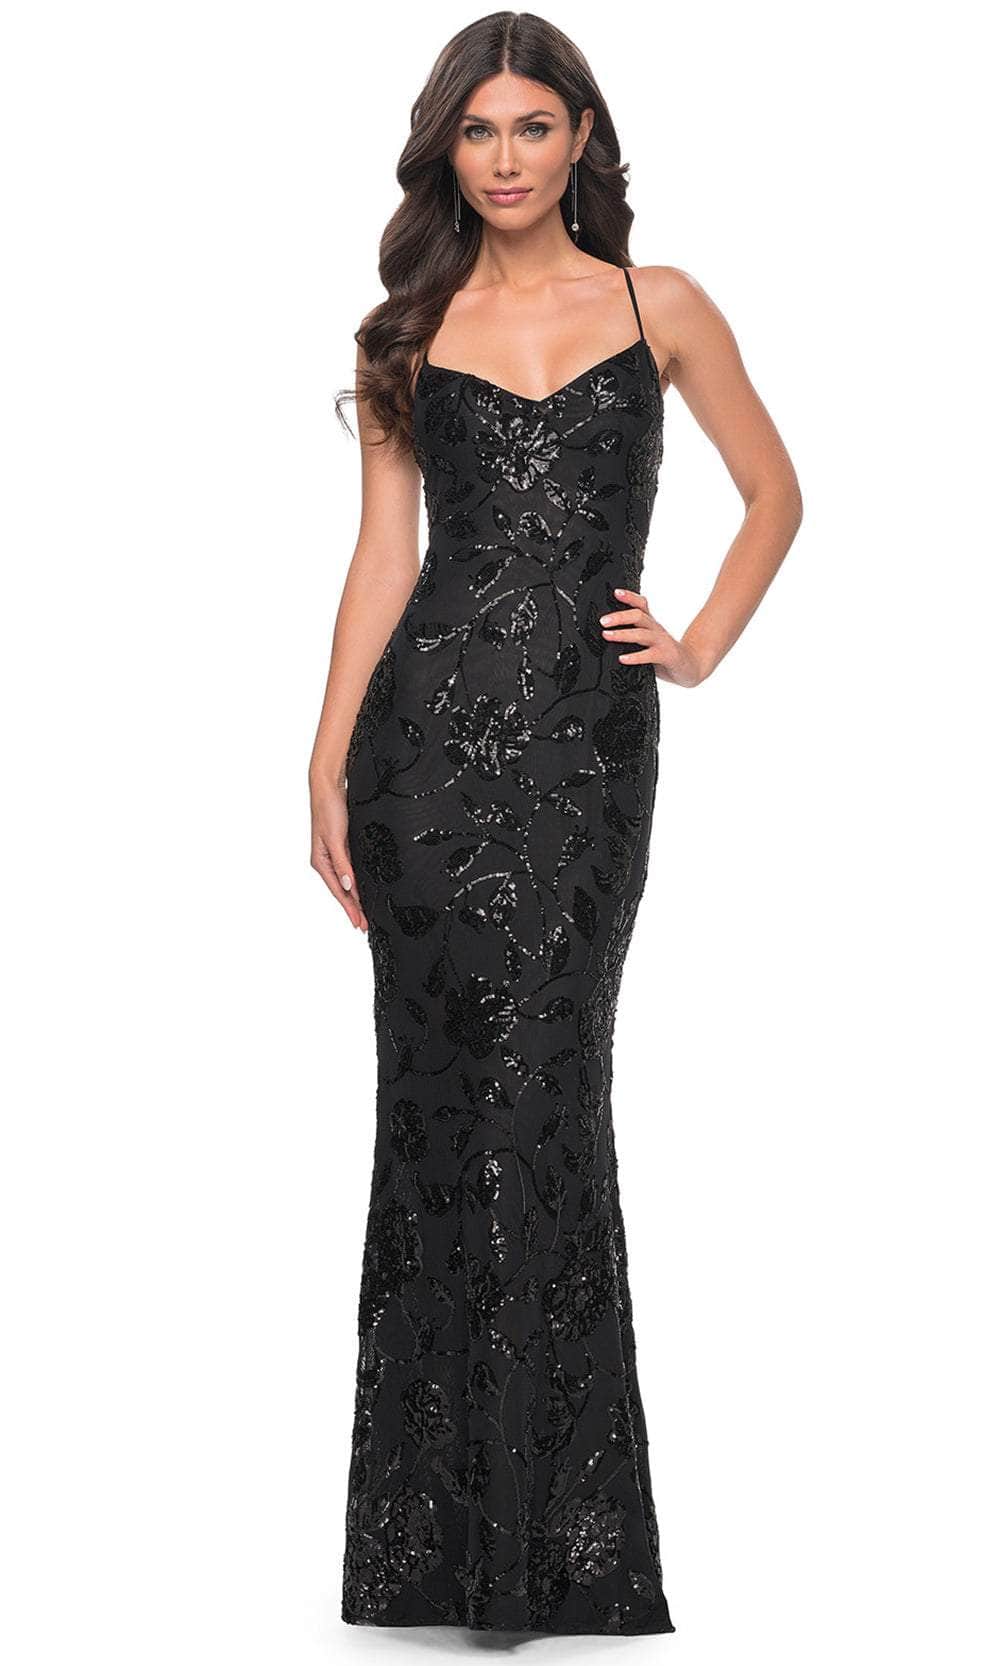 Image of La Femme 32415 - Floral Sequin Sleeveless Prom Gown